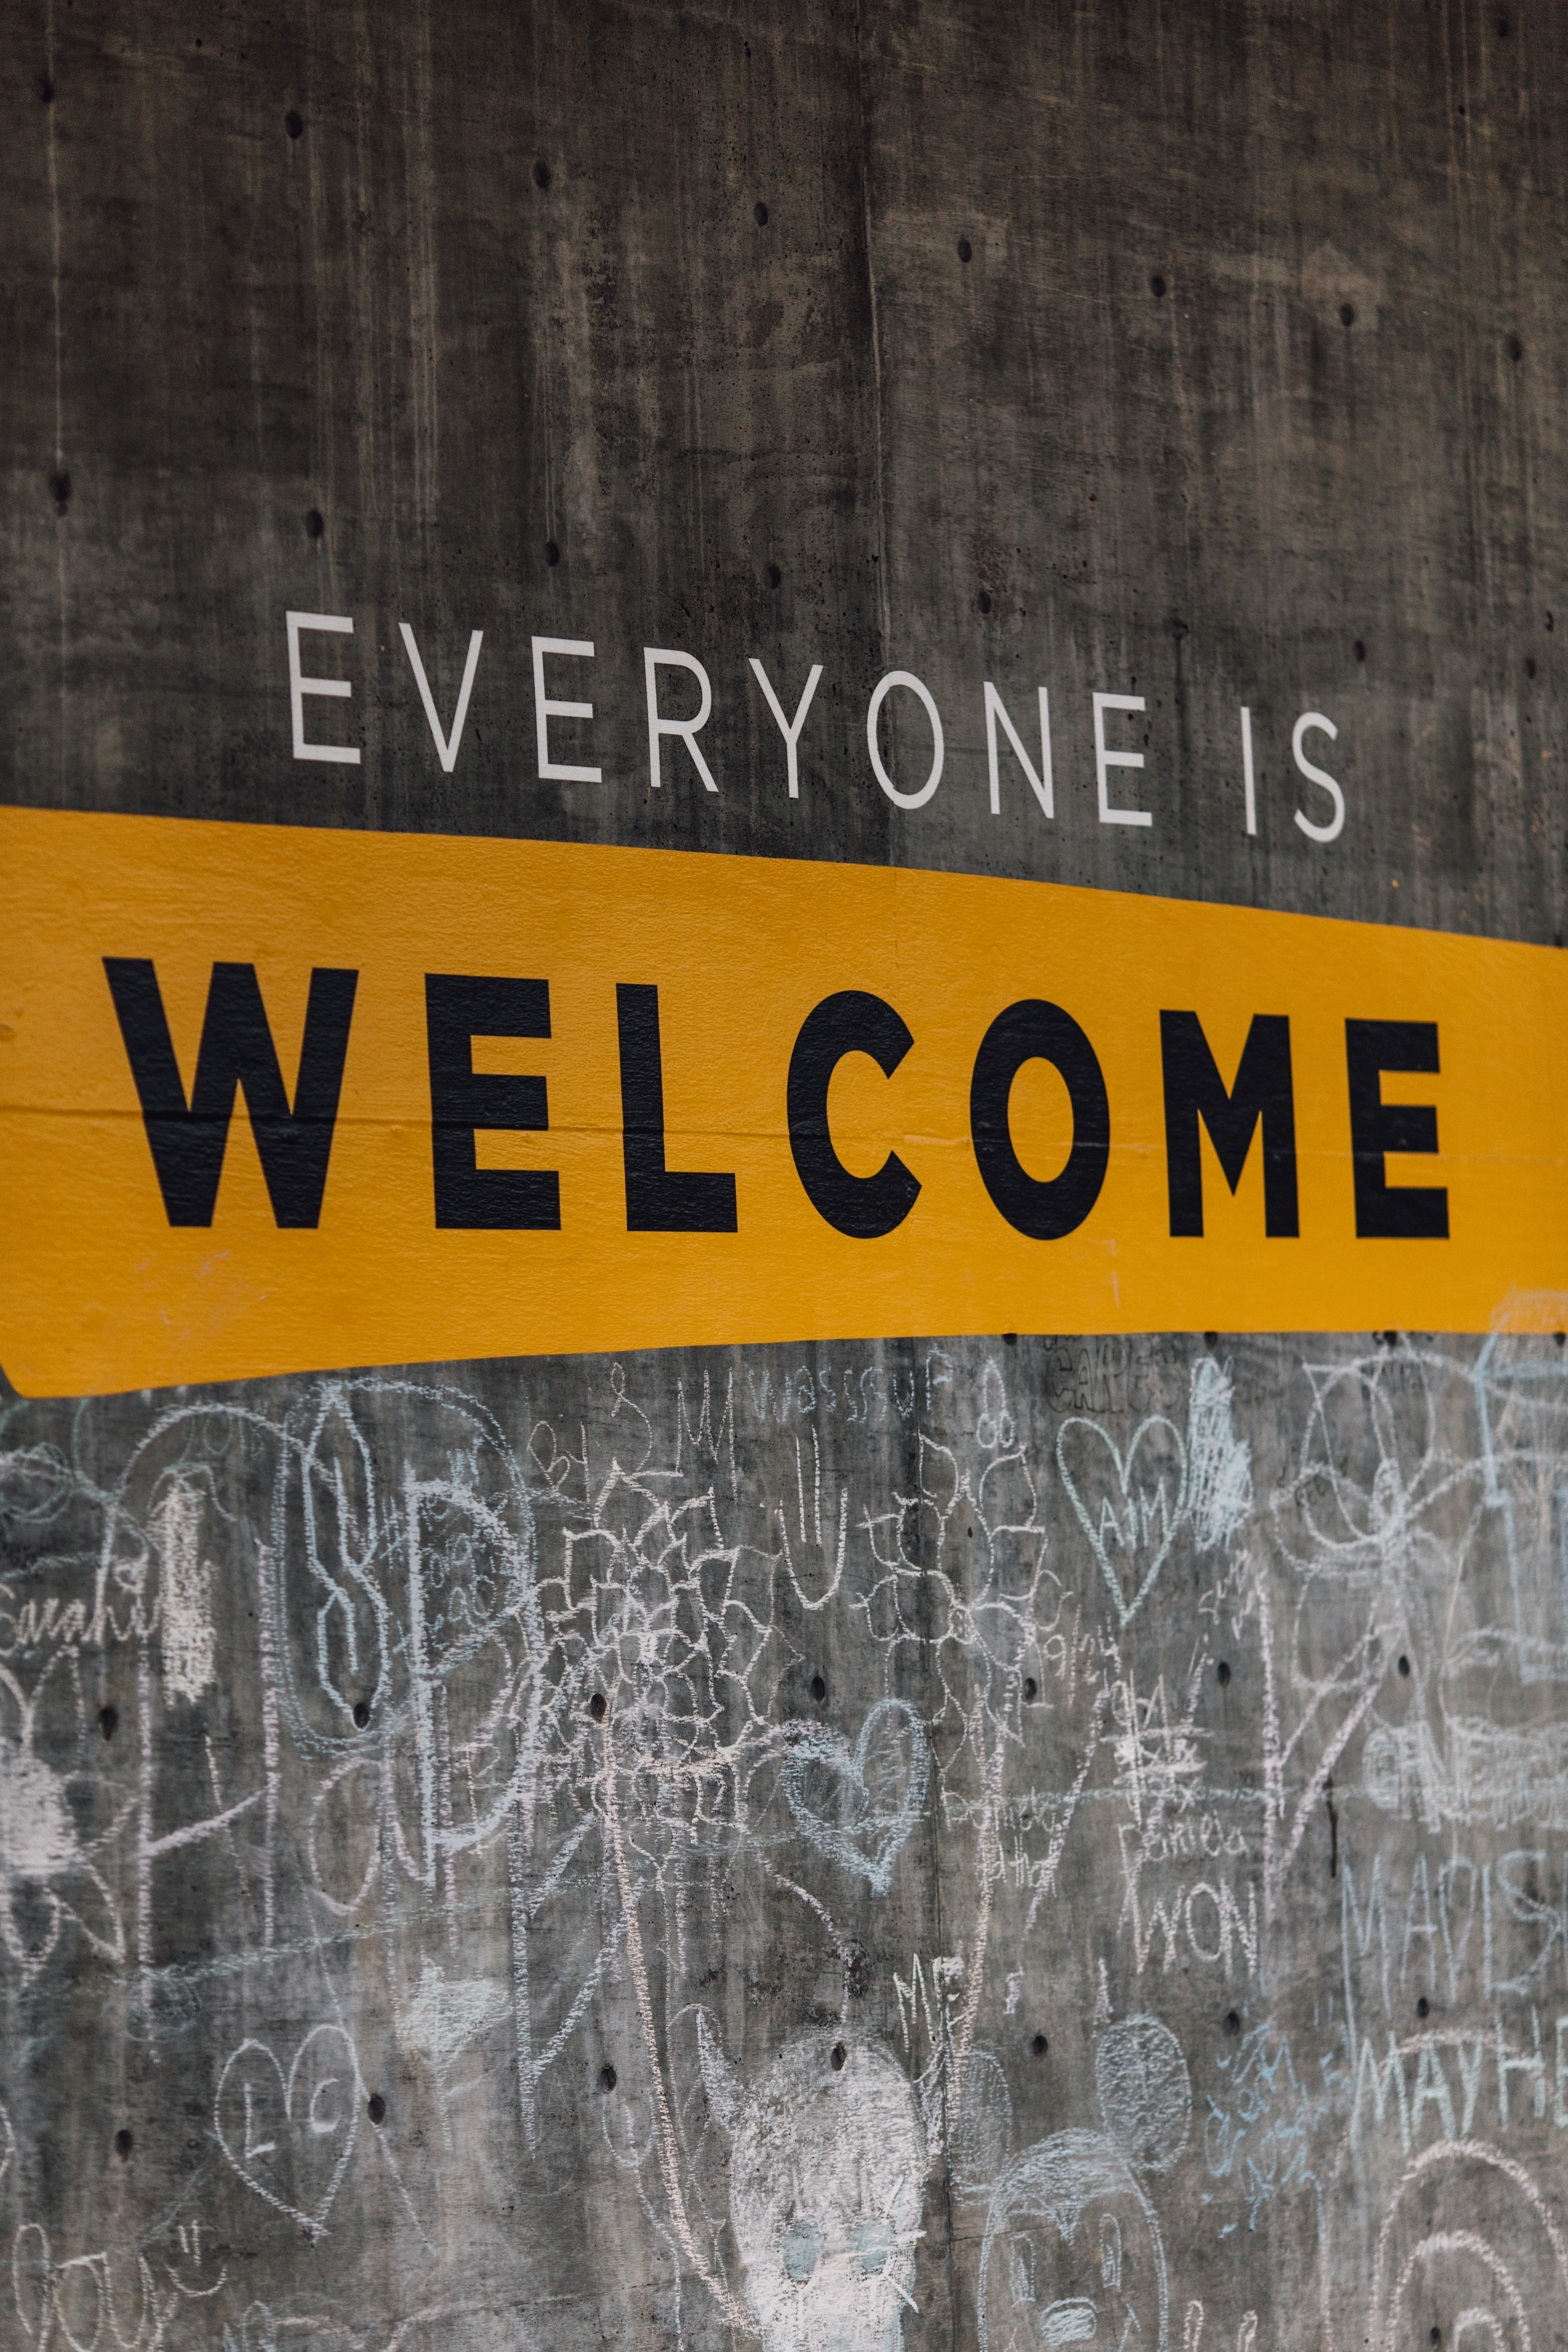 ‘Everyone is Welcome’ signage